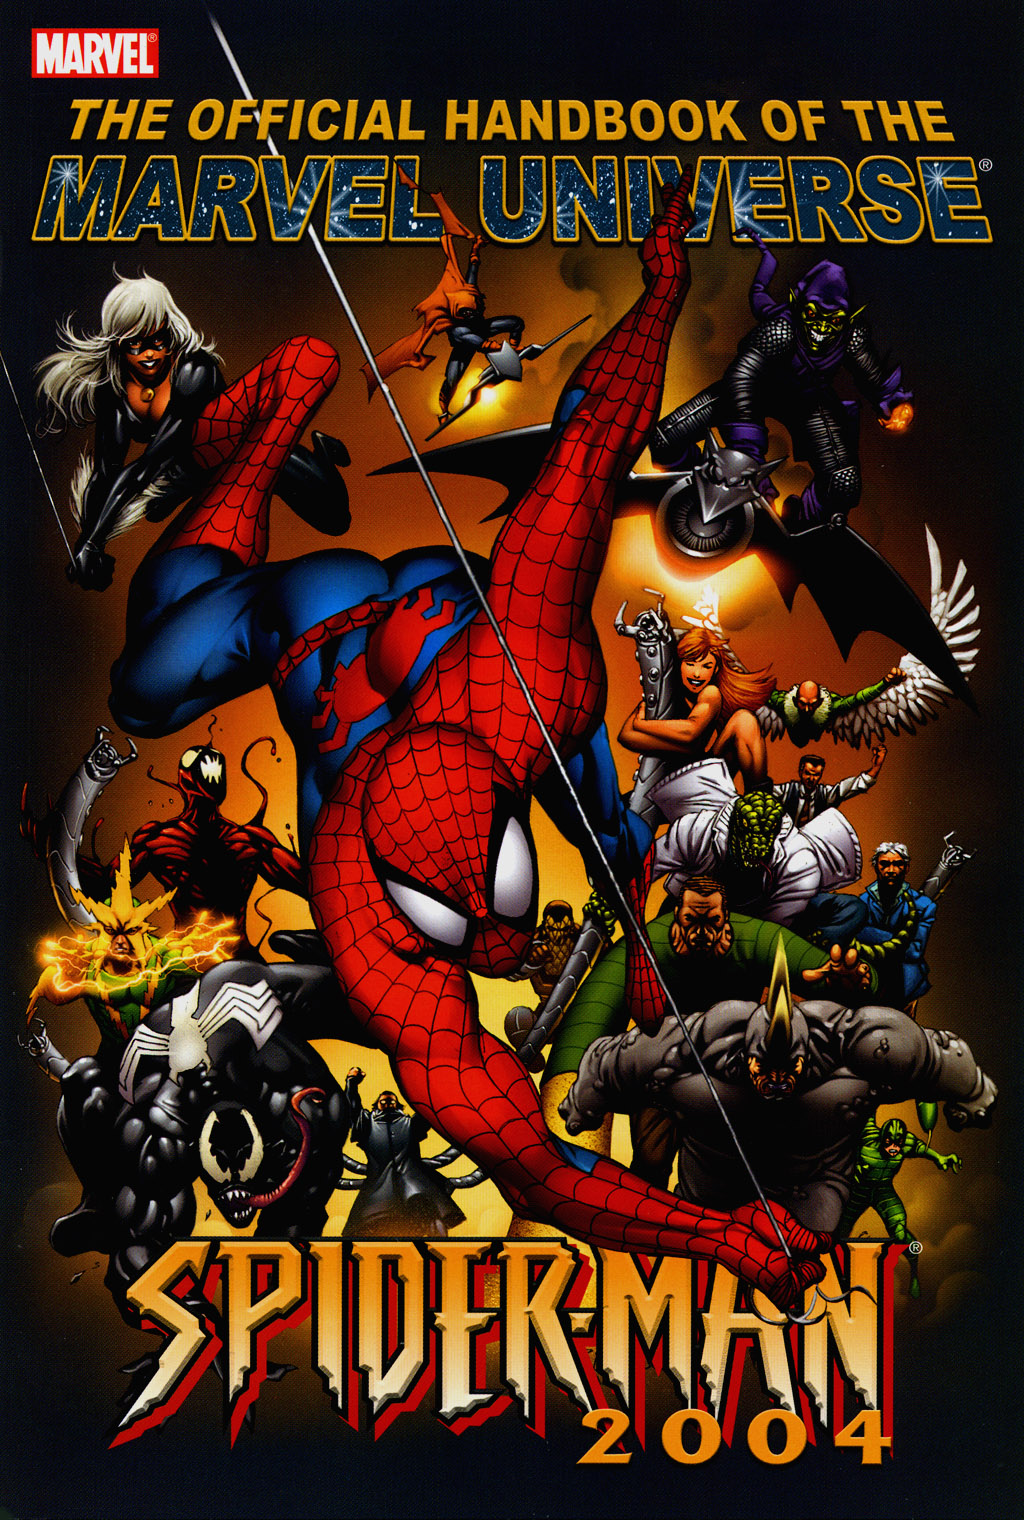 Read online Official Handbook of the Marvel Universe: Spider-Man 2004 comic -  Issue # Full - 1